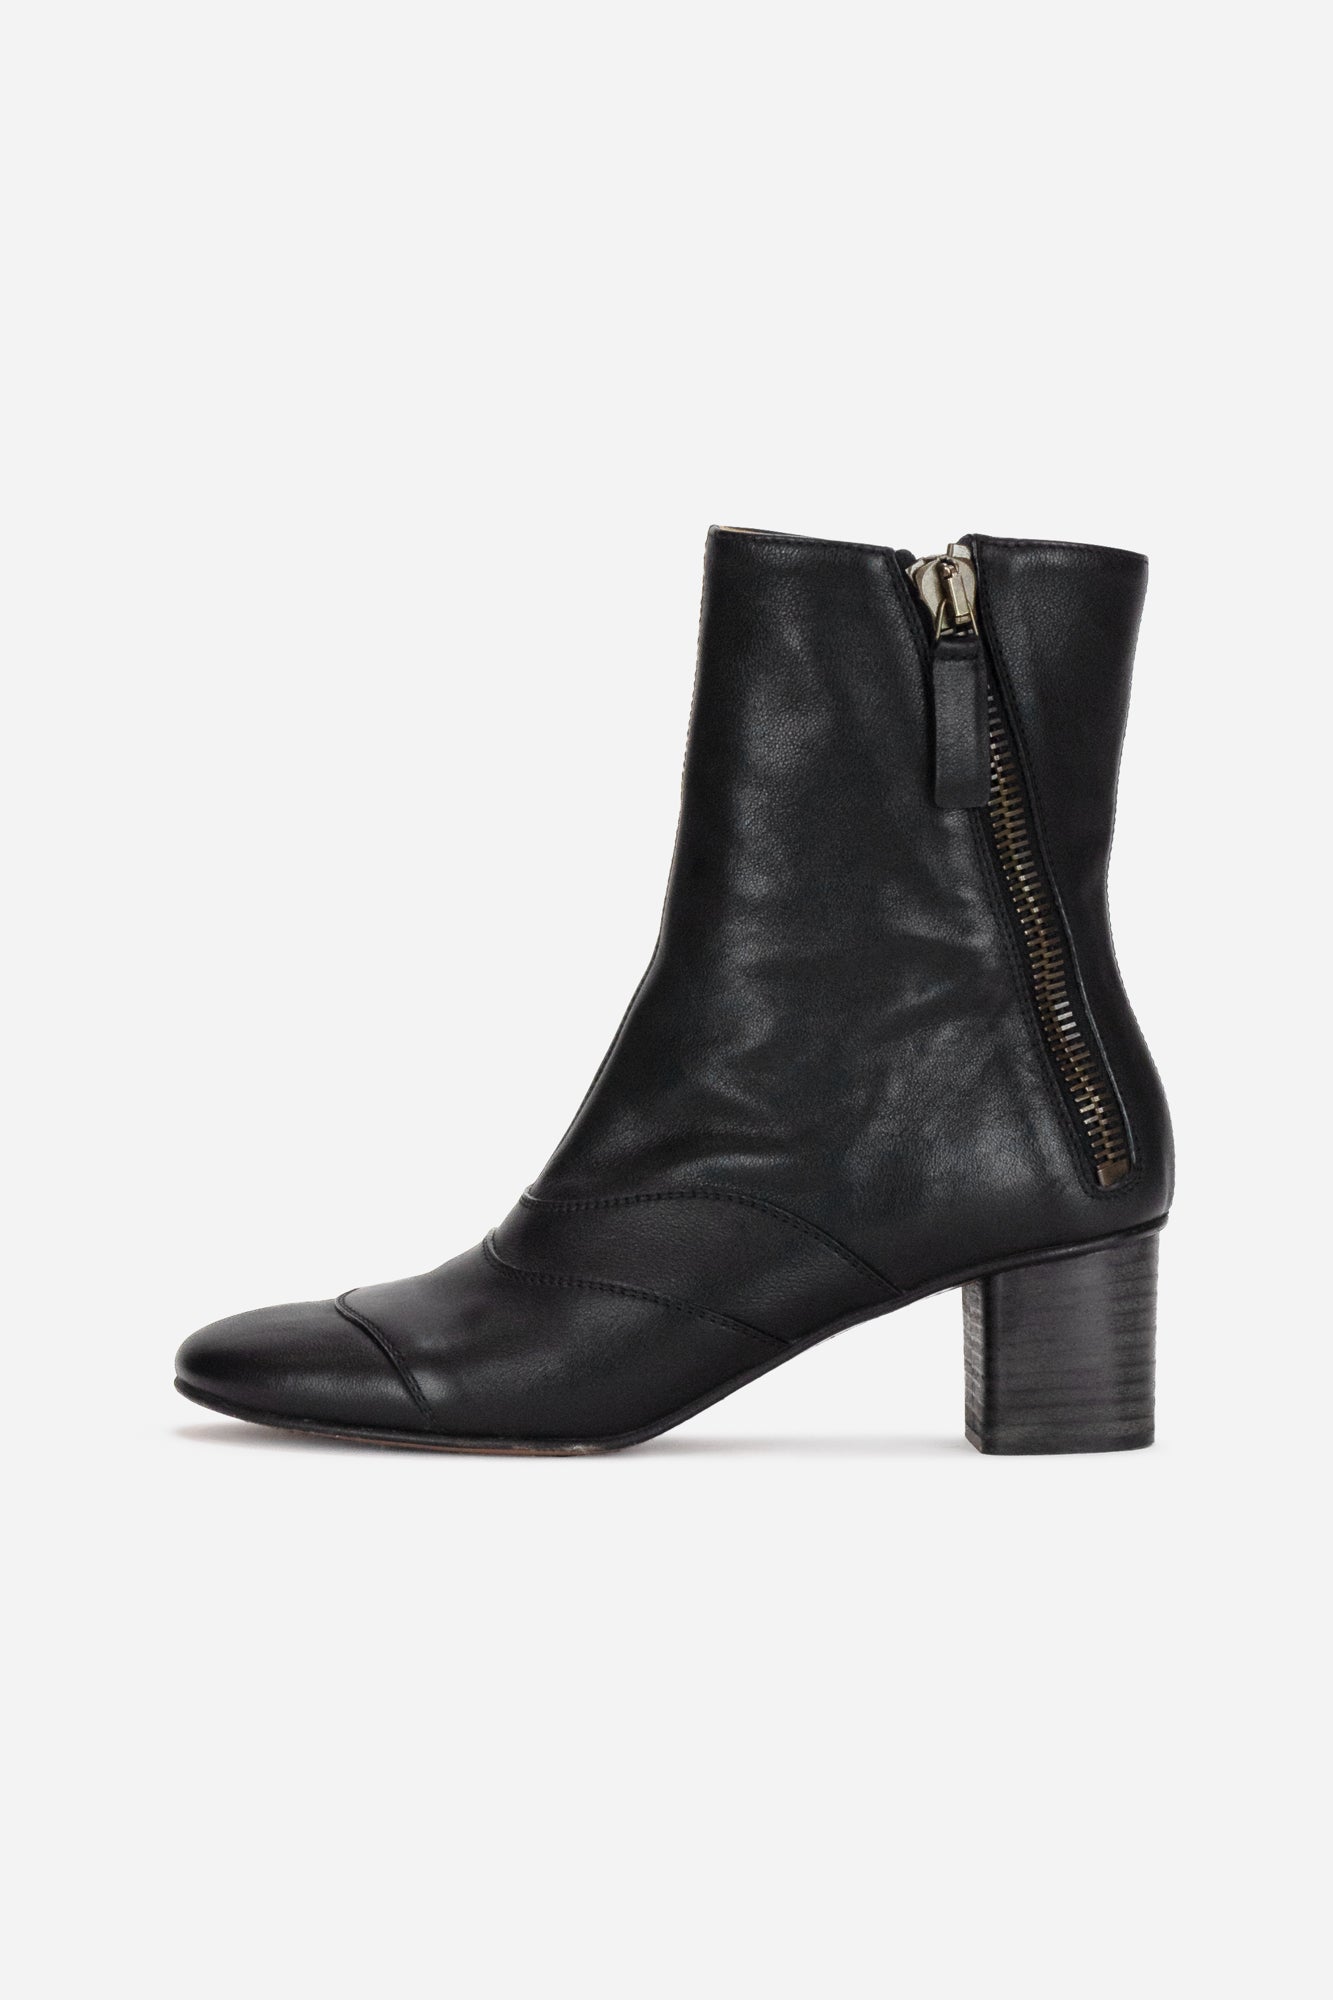 Black Leather Boots with Zipper Detail